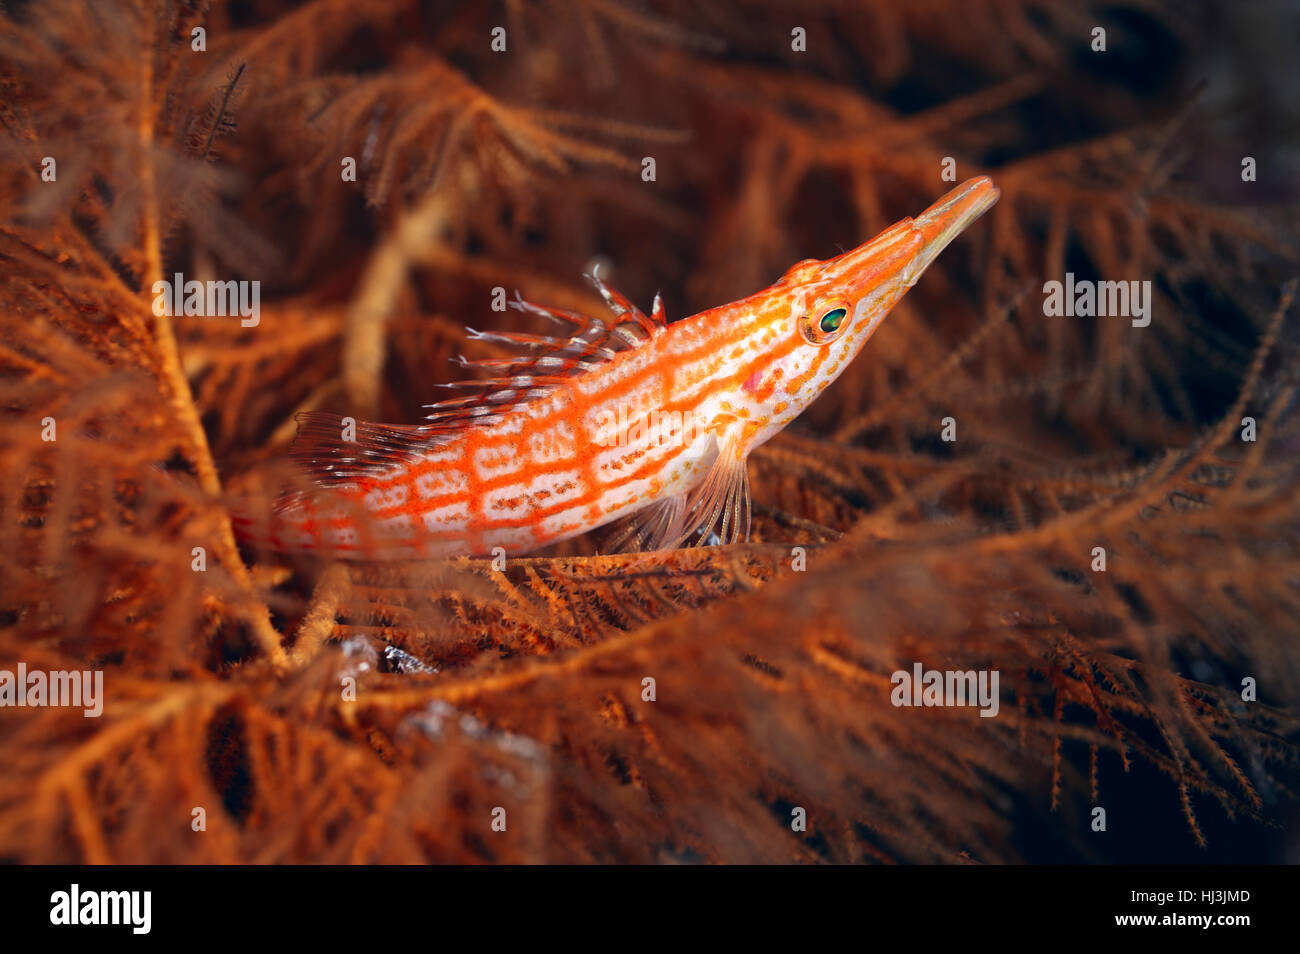 Underwater photo of Longnose hawkfish between the branches of the Black coral Stock Photo